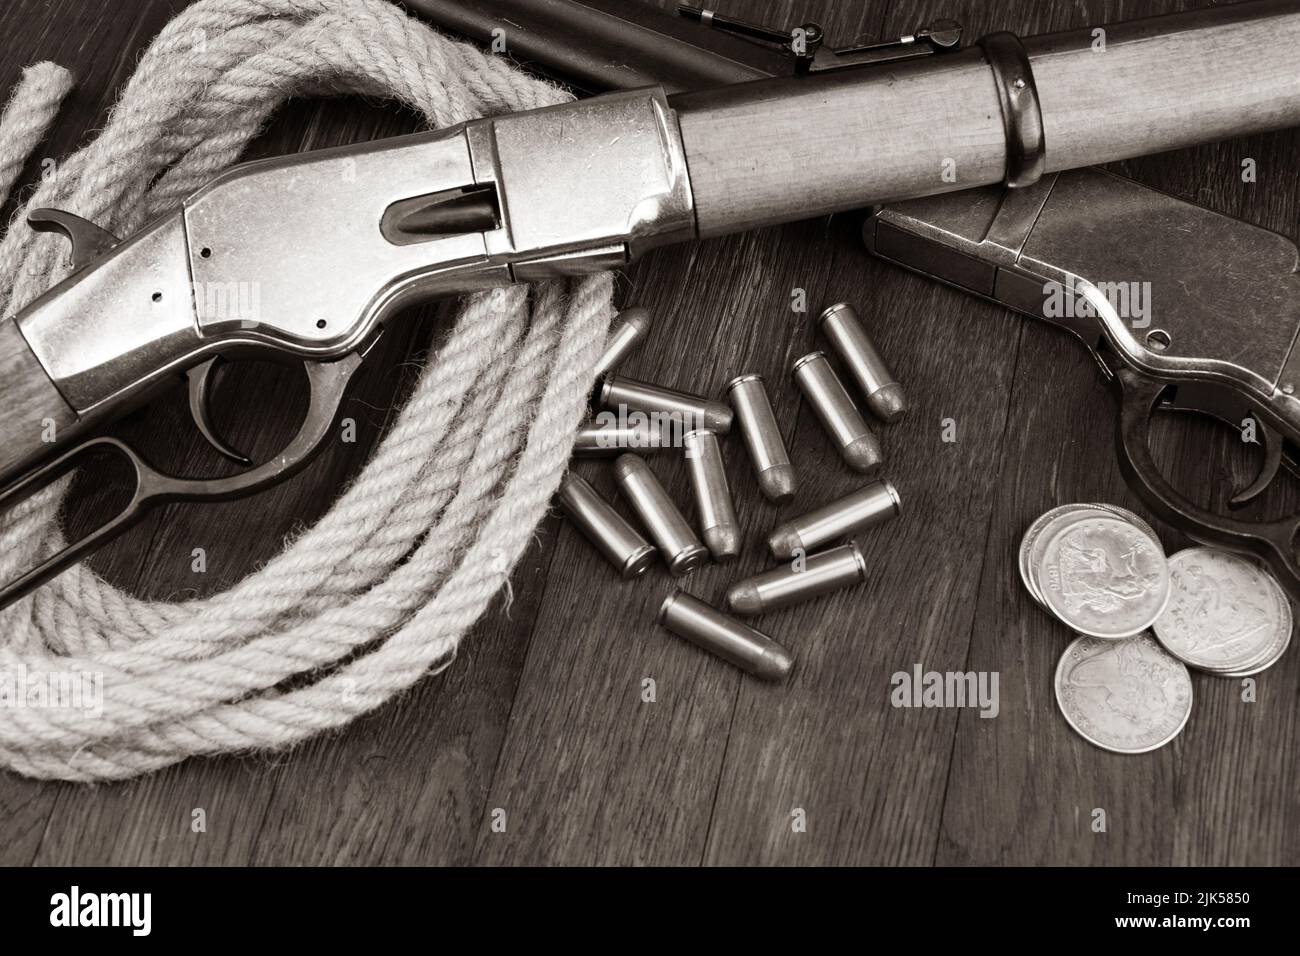 Old west guns - lever-action repeating rifles with ammunition and silver dollar coins on wooden table. Sepia tone. Stock Photo